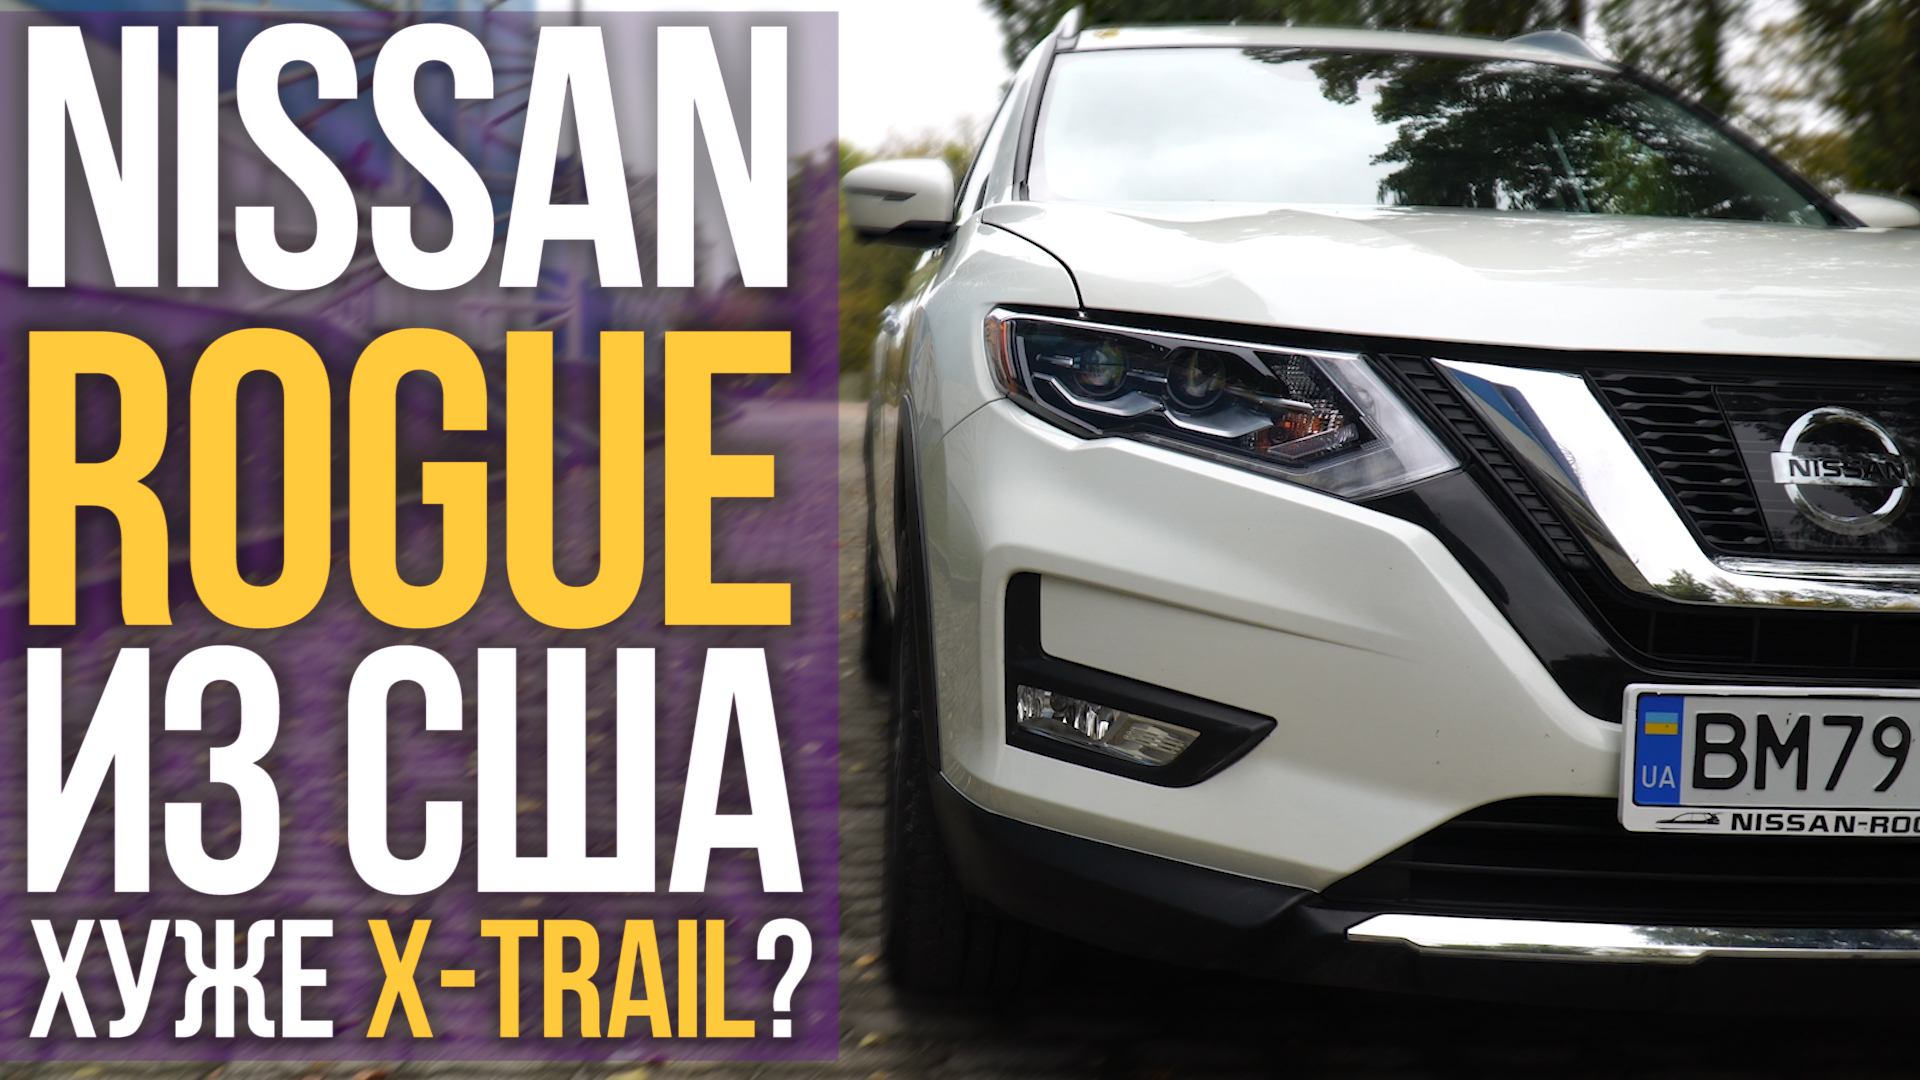 Nissan Rogue review